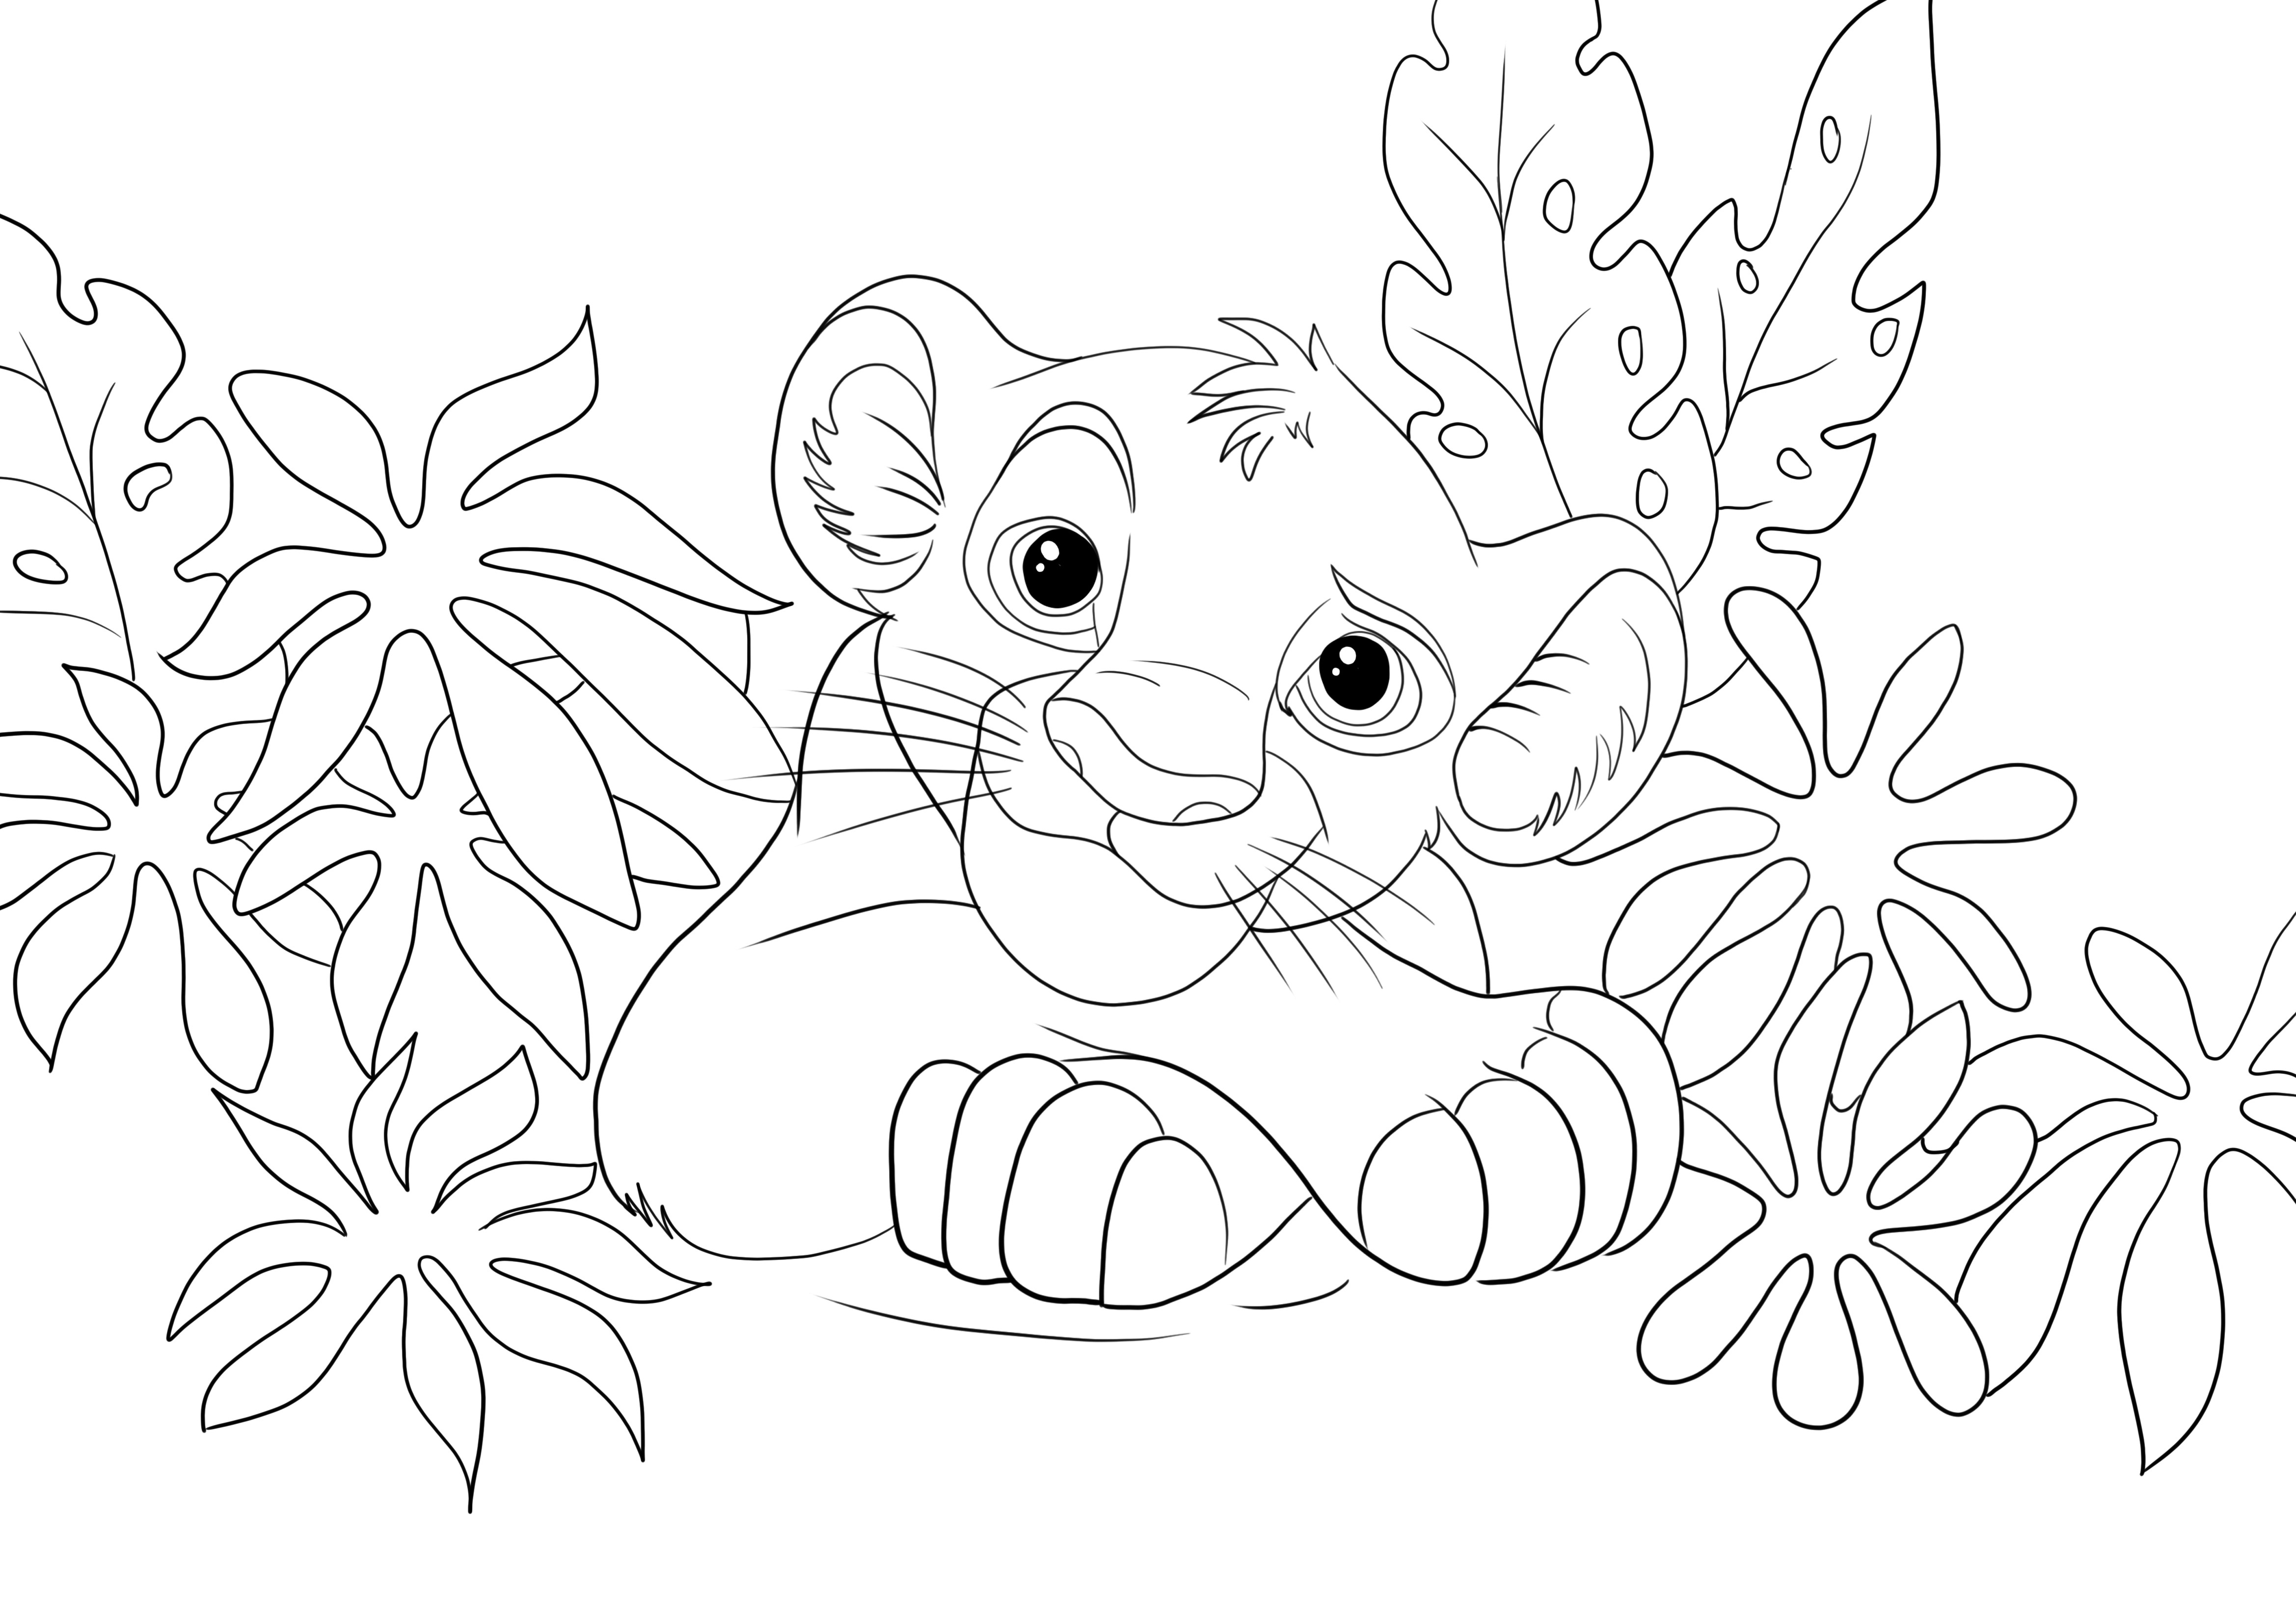 Cute lion Simba coloring image for free downloading